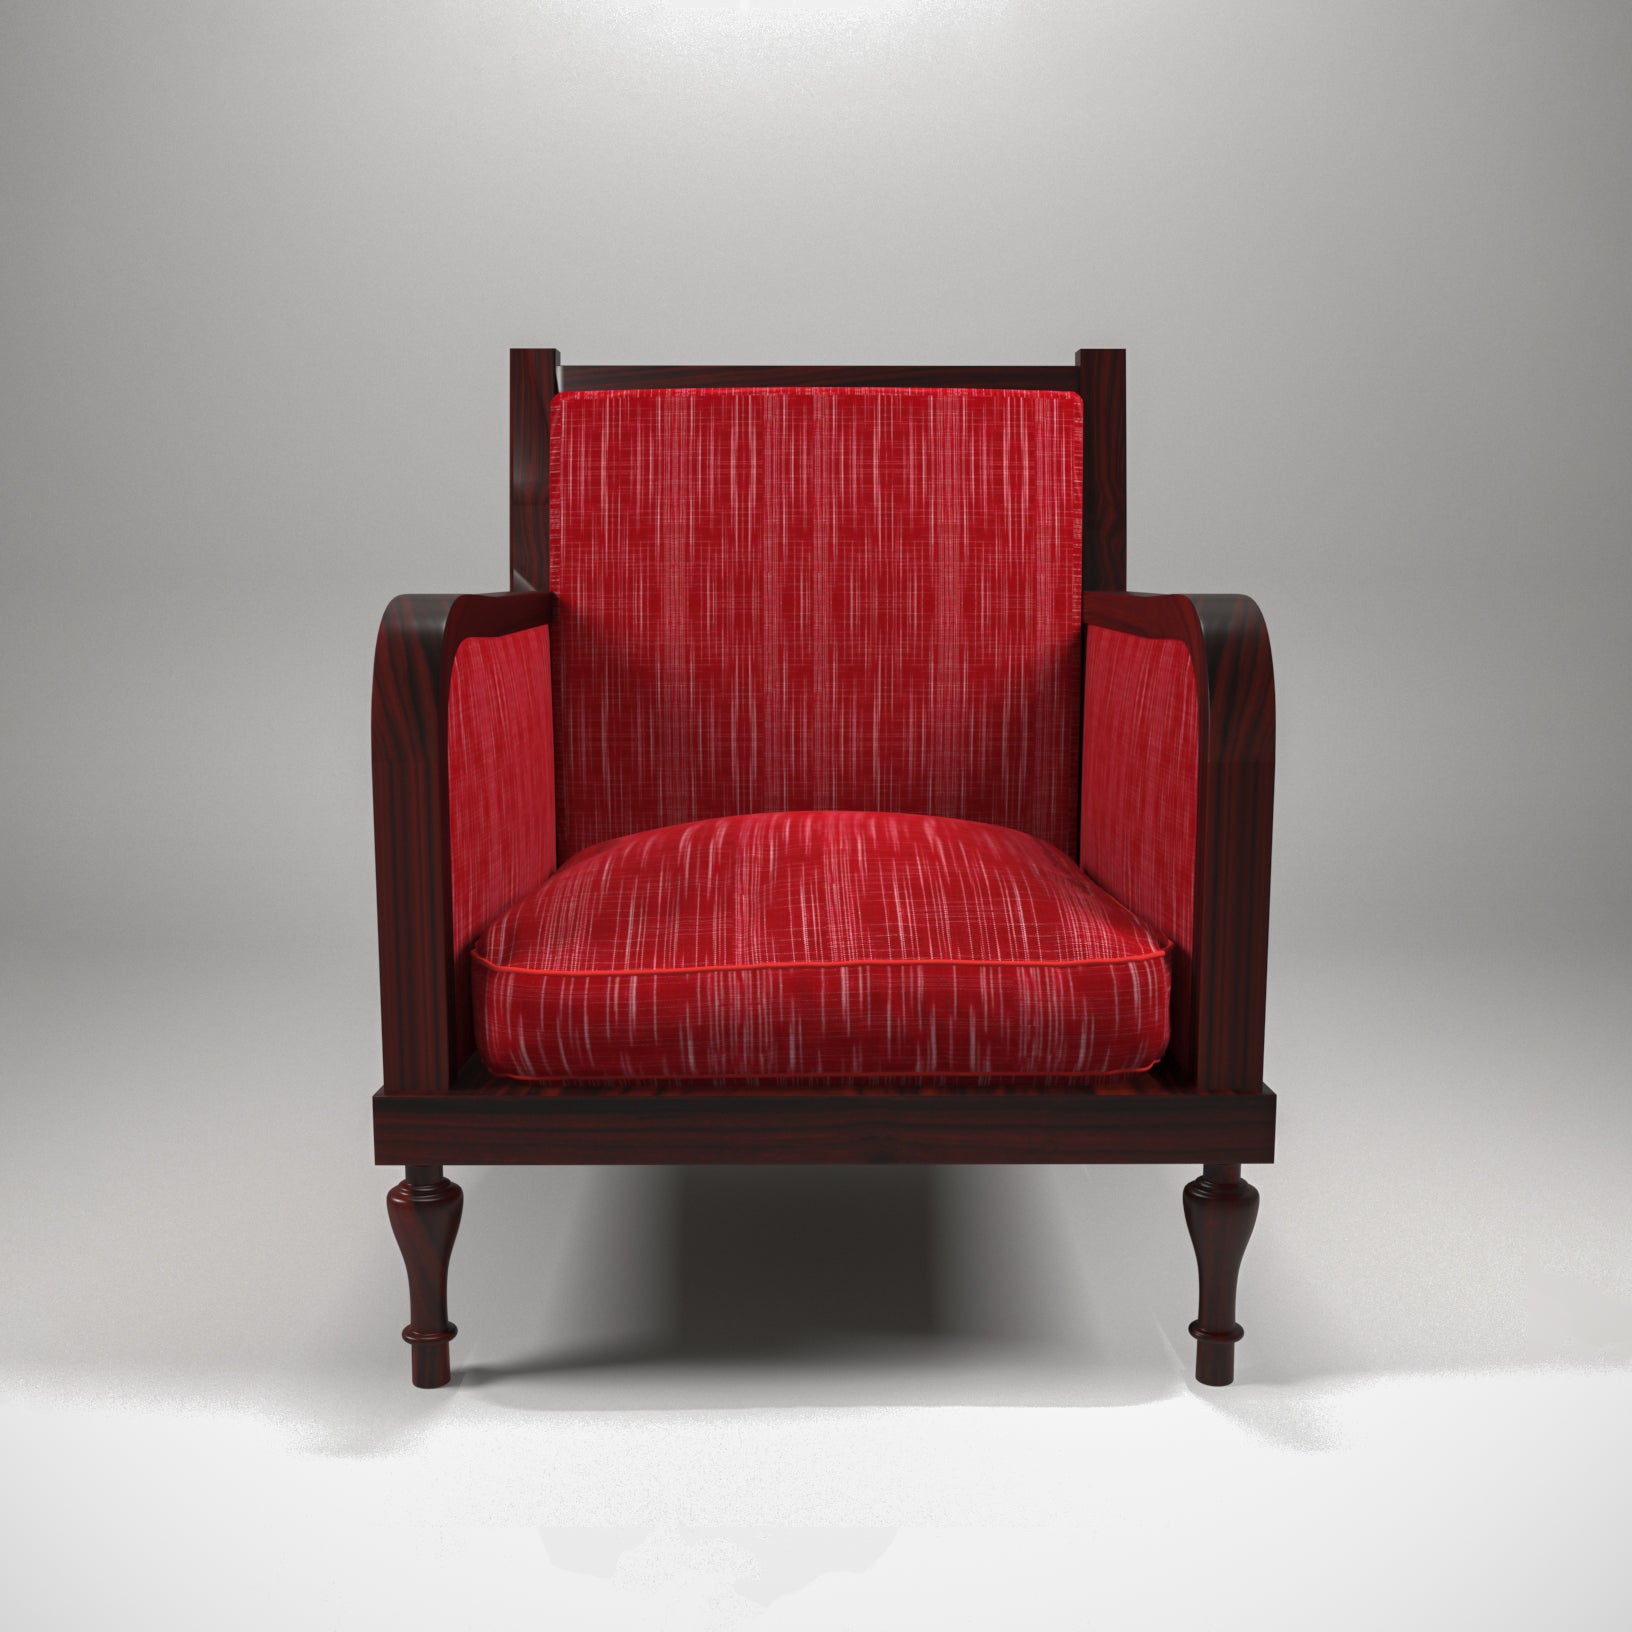 Rustic Red Upholstered Handmade Wooden Arm Chair for Home Arm Chair